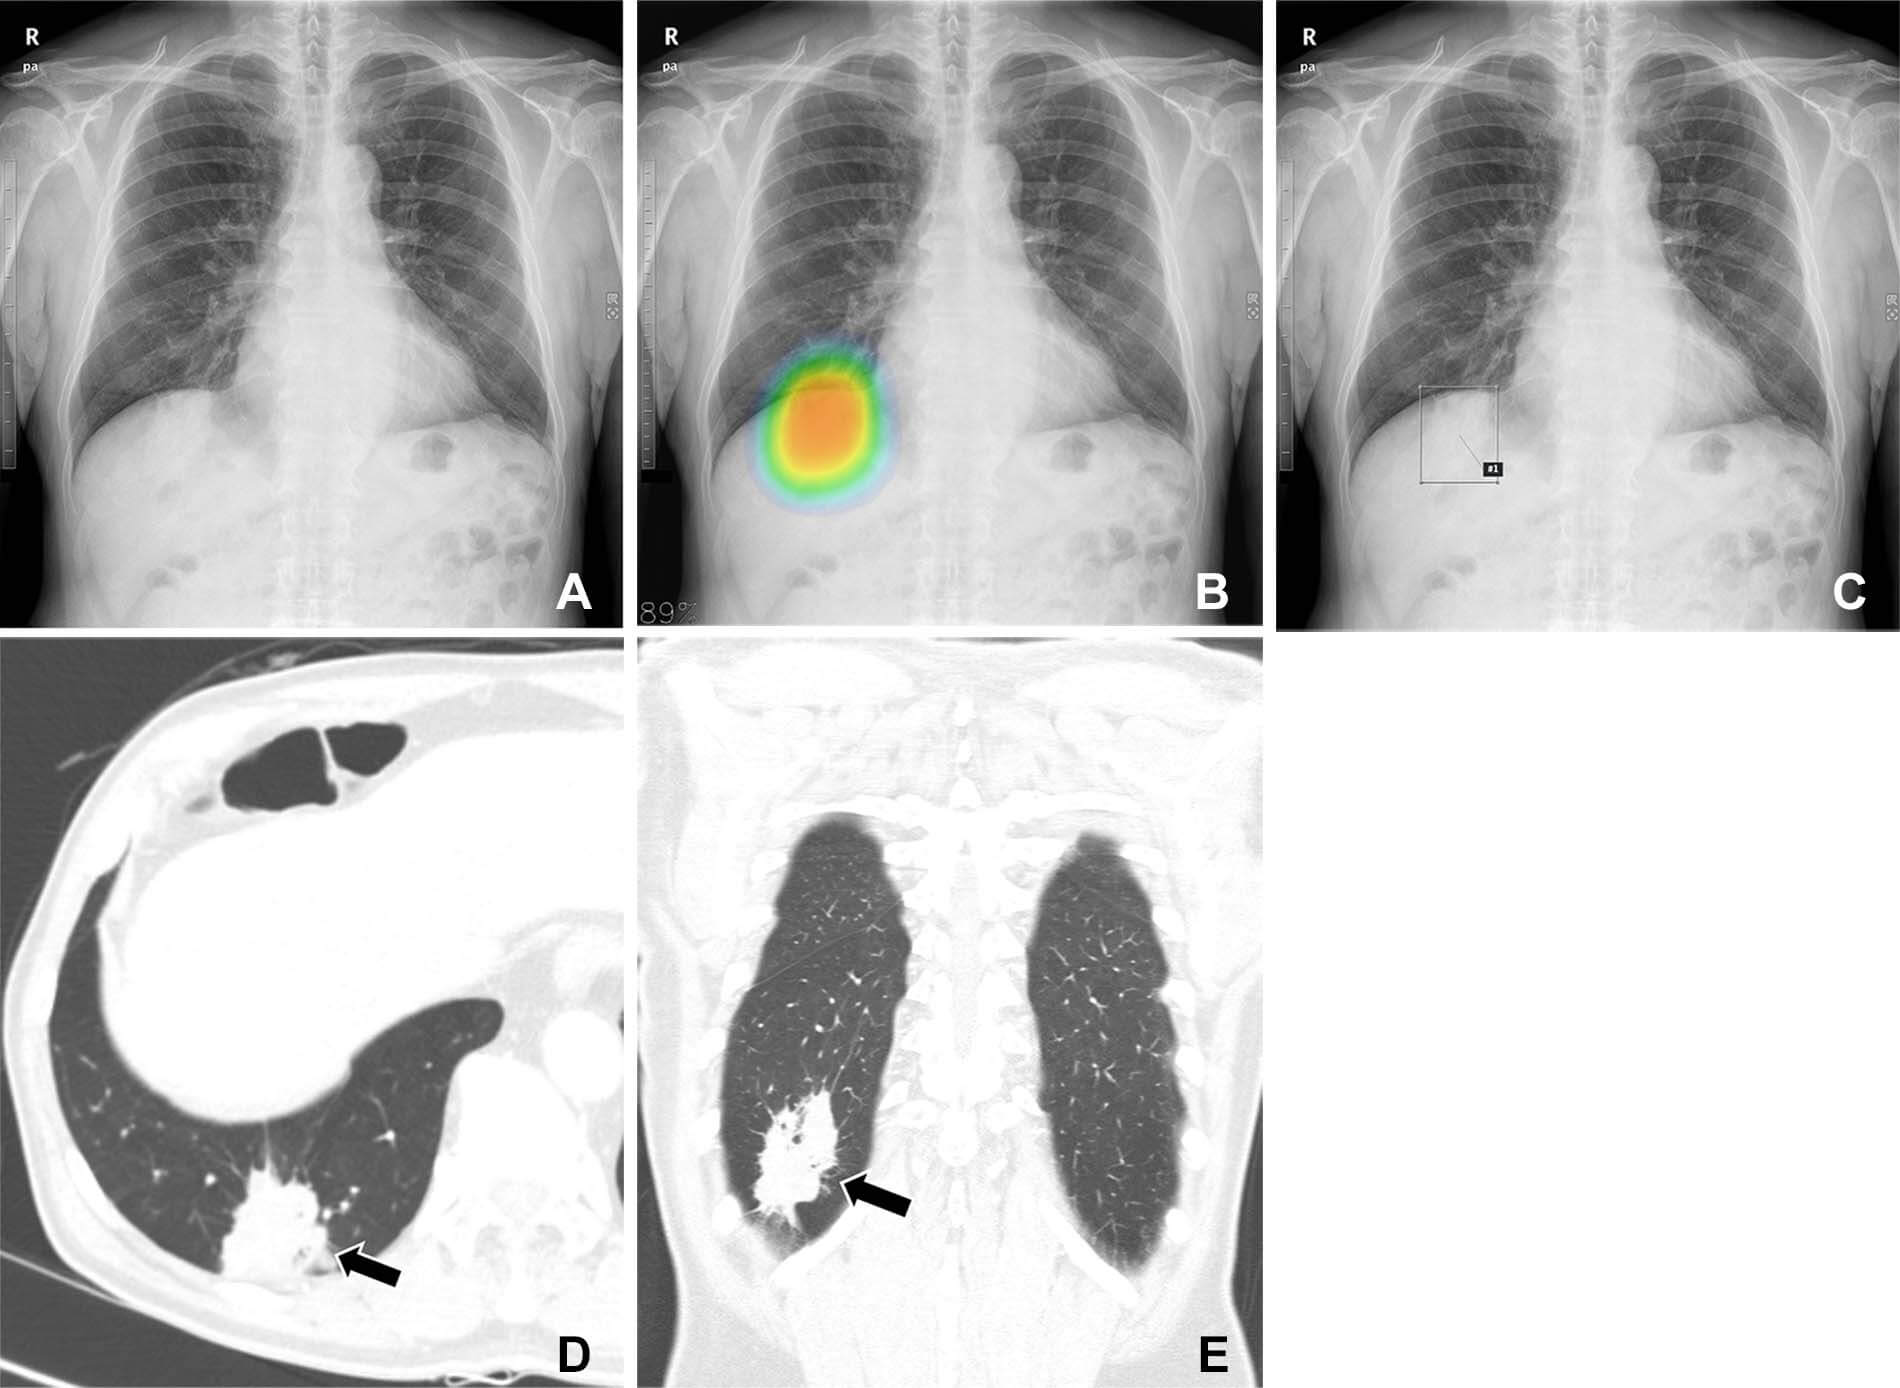 Chest radiographs obtained as part of a health checkup in a 71-year-old male patient show reader susceptibility to high diagnostic accuracy artificial intelligence (AI).